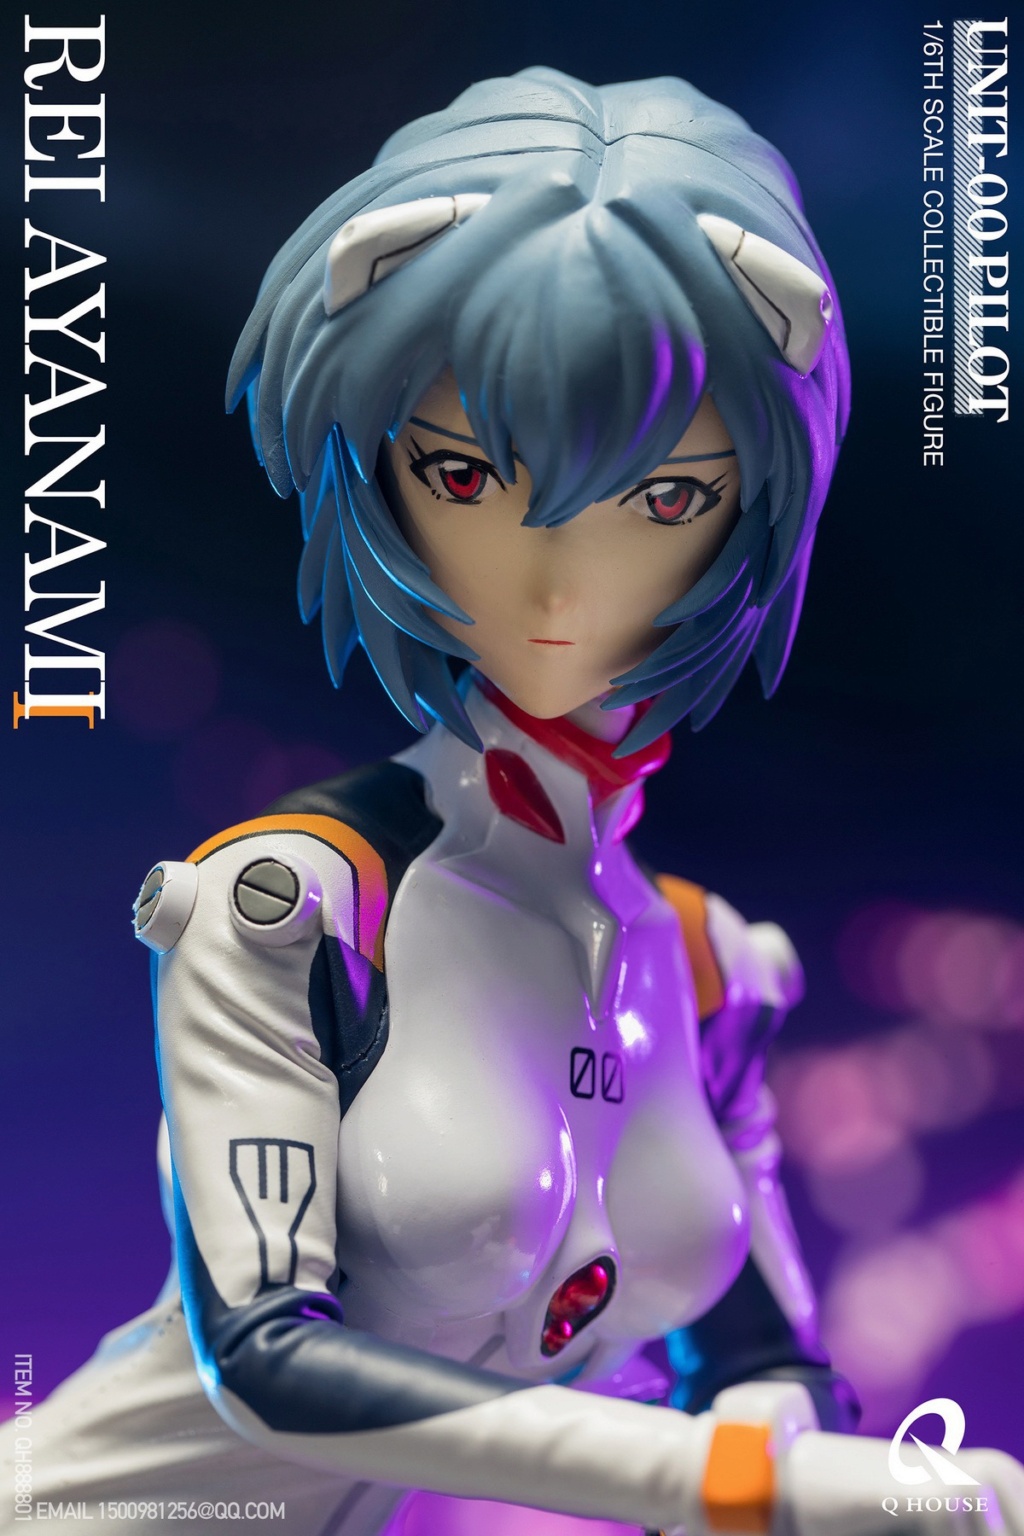 NEW PRODUCT: Q House: 1/6 Evangelion - Rei Ayanami  11142310